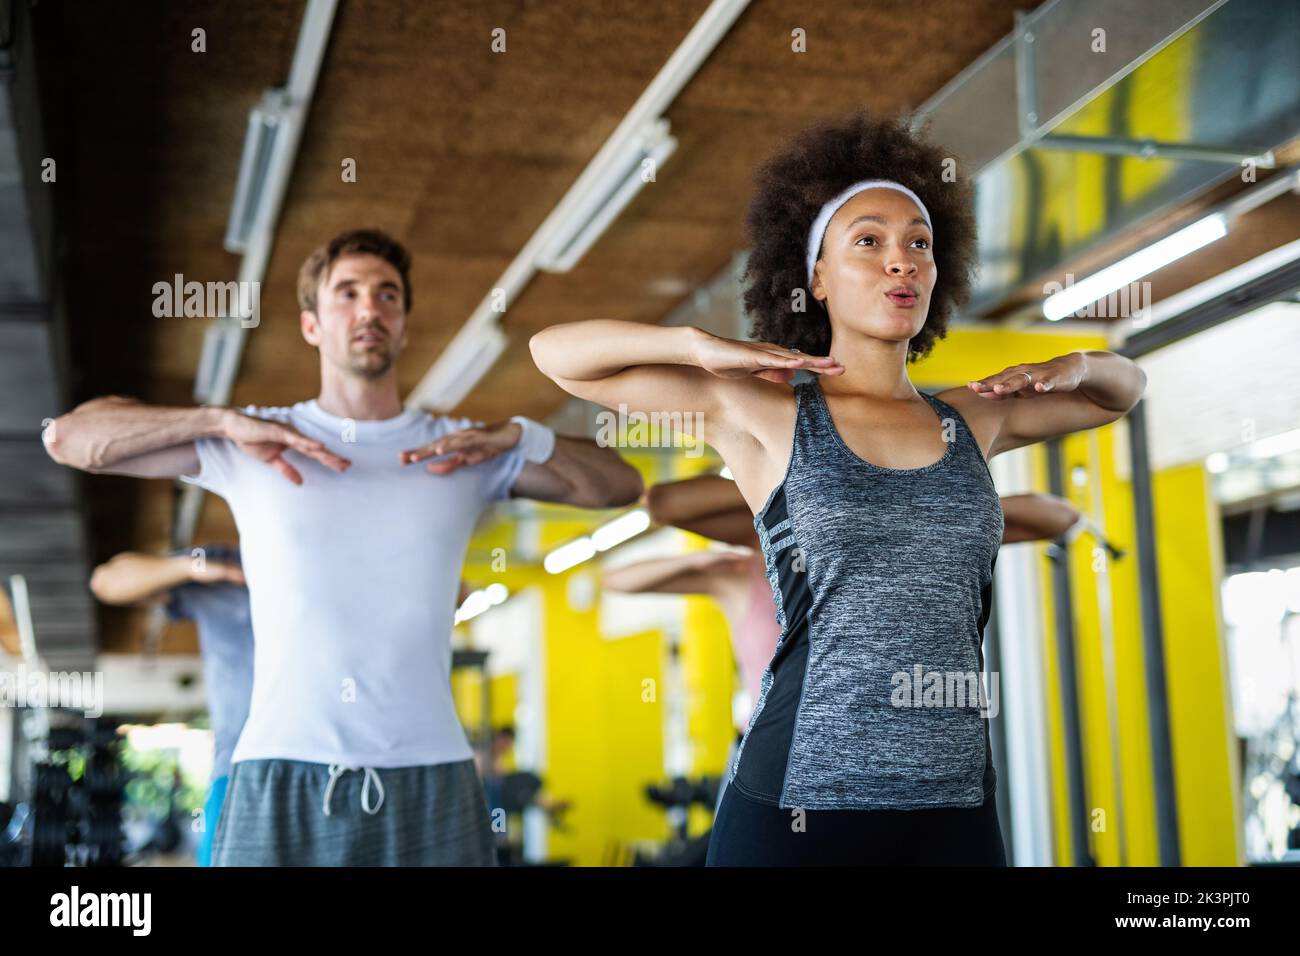 Fitness, sport, people and lifestyle concept. Group of smiling people exercising together in gym Stock Photo